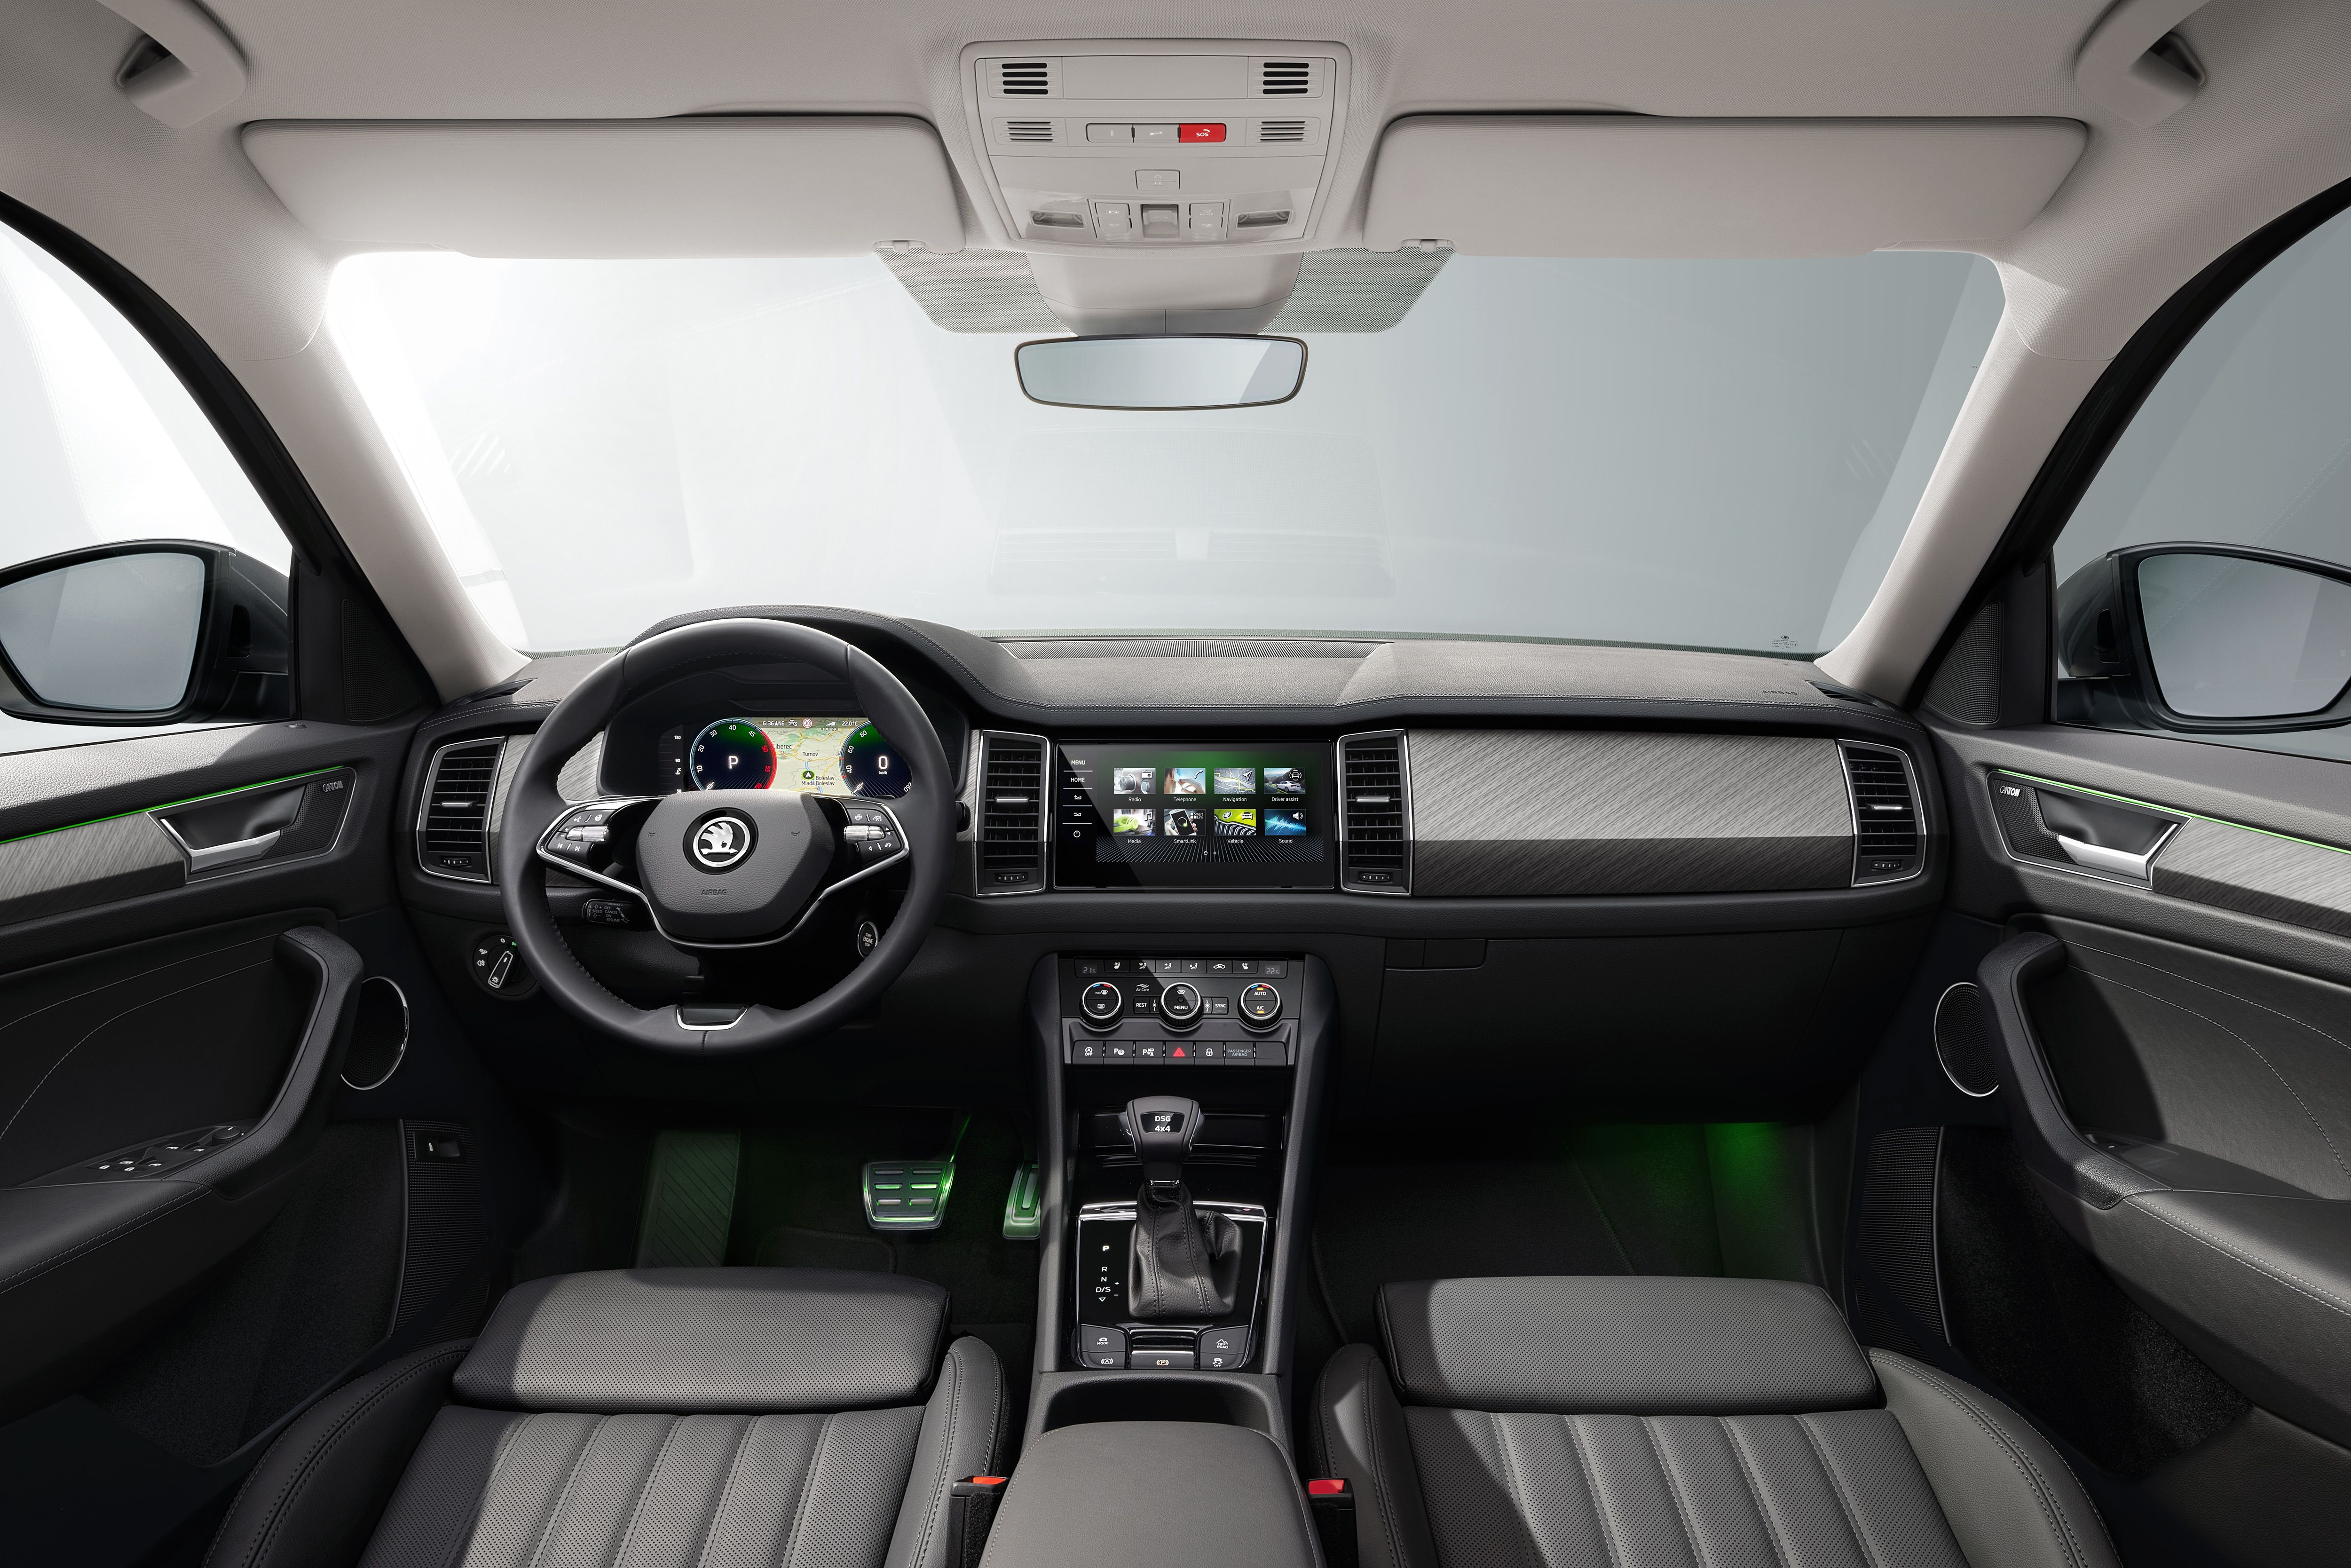 The interior of the Kodiaq, from the front seats